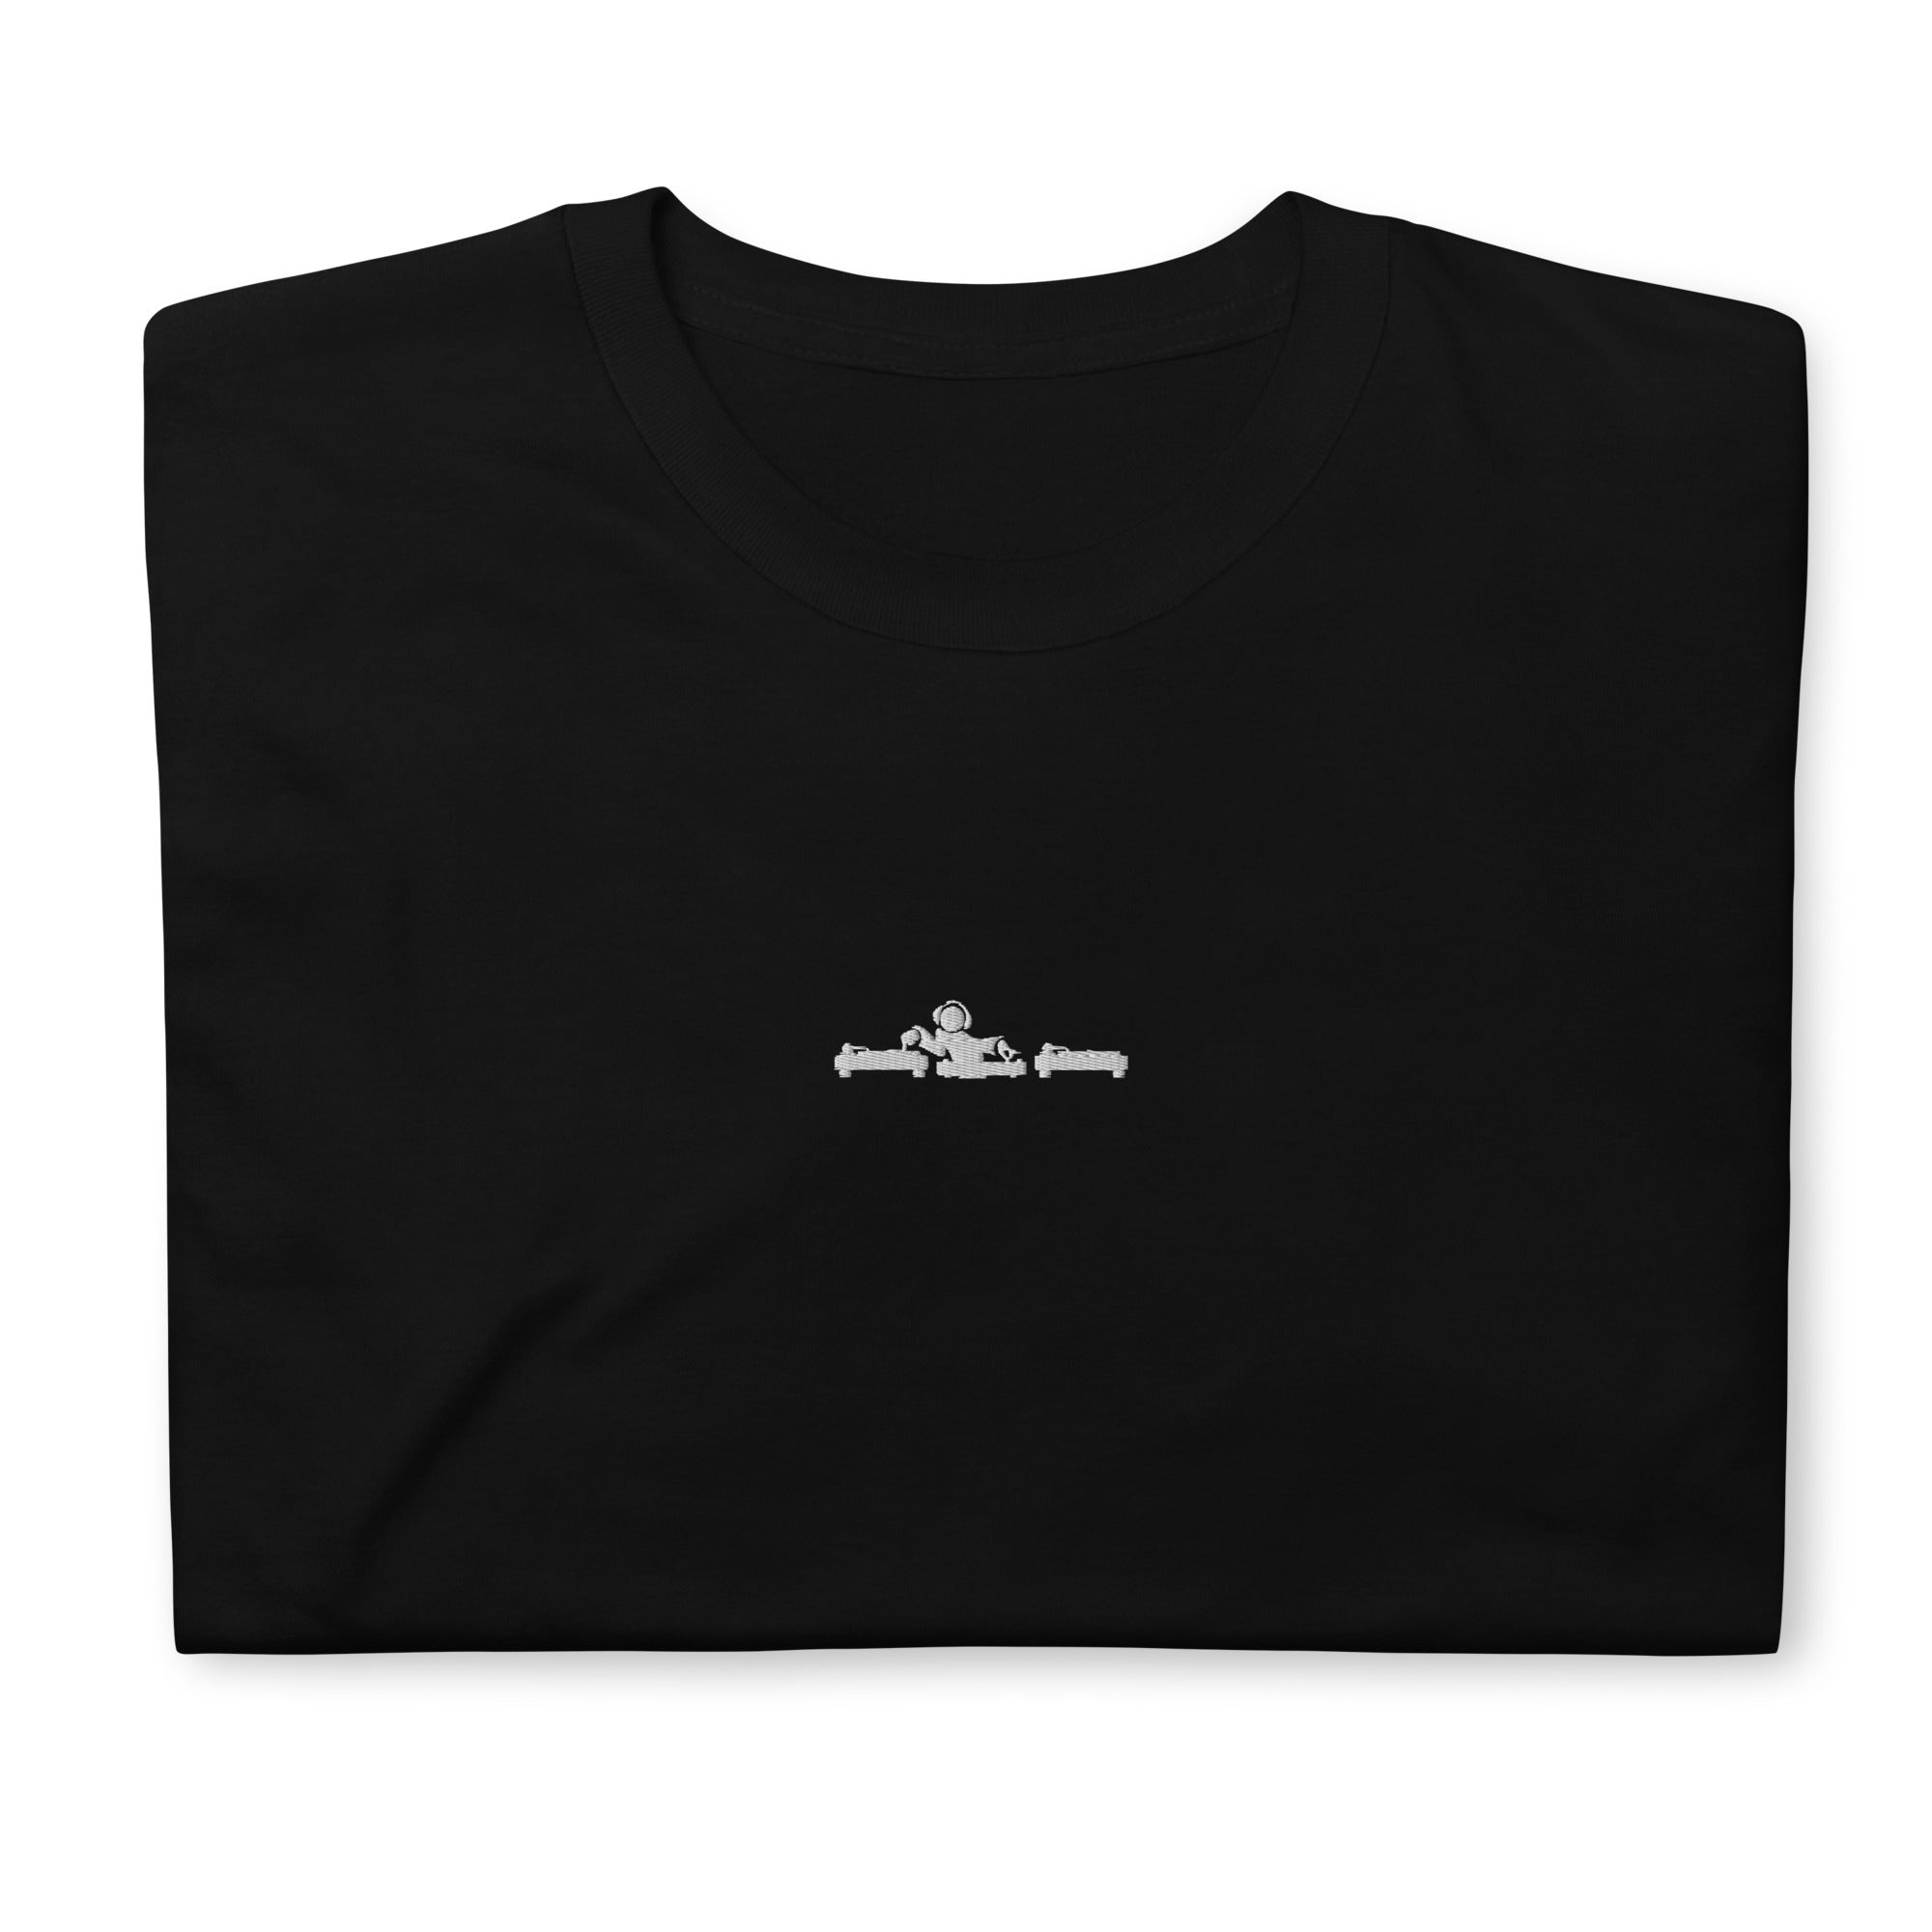 DJ and Turntables N4MR Embroidered Logo T-shirt